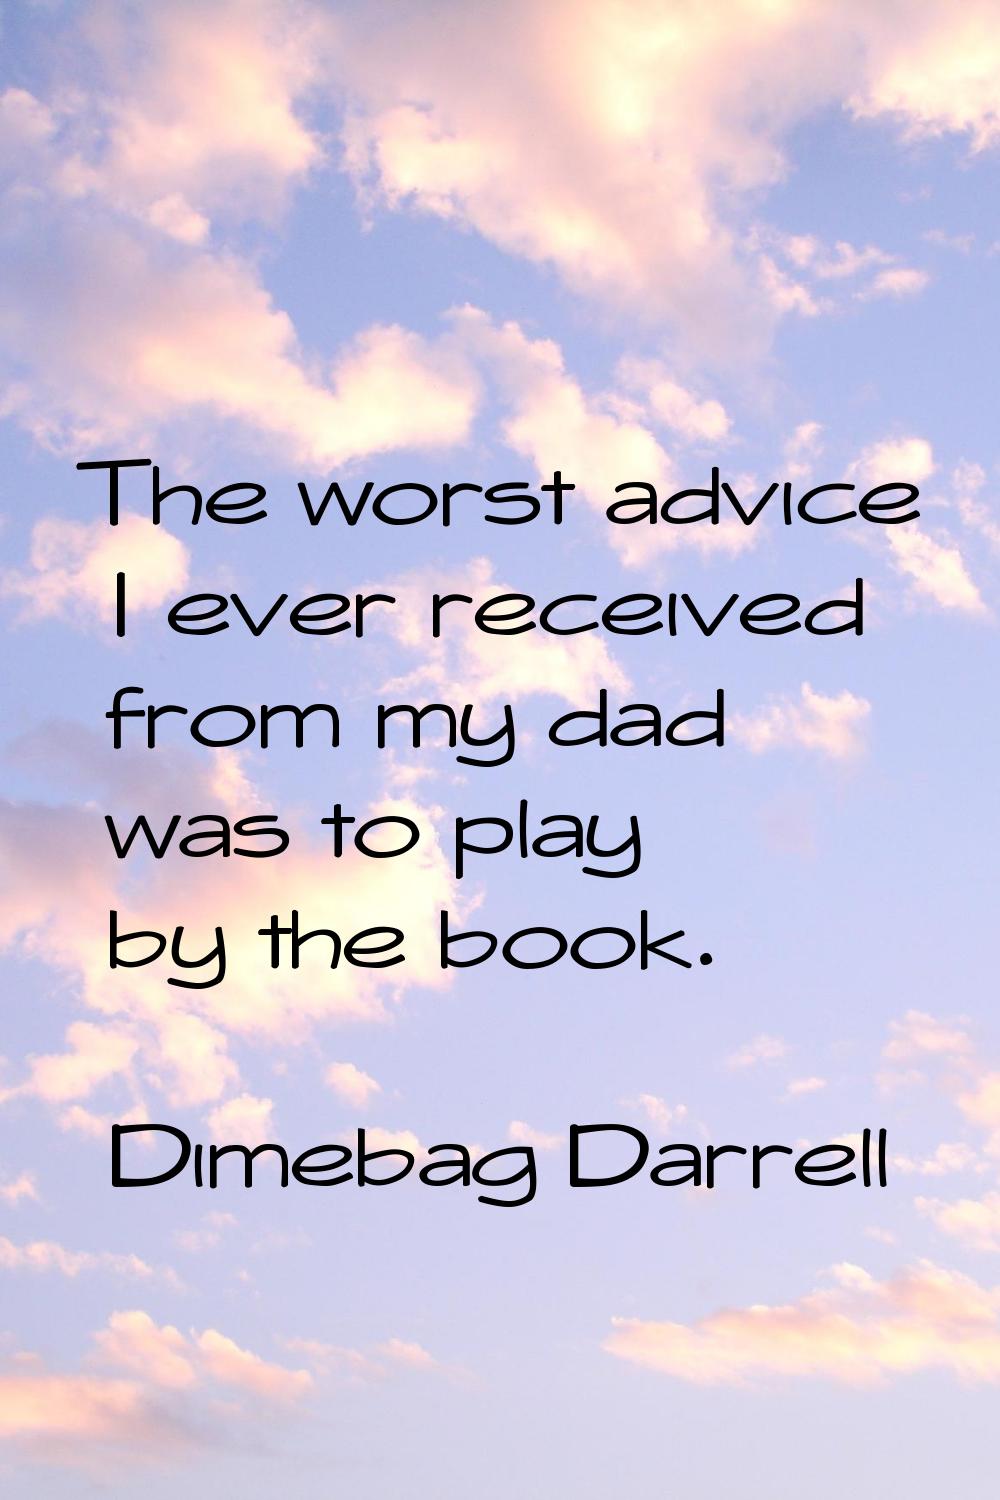 The worst advice I ever received from my dad was to play by the book.